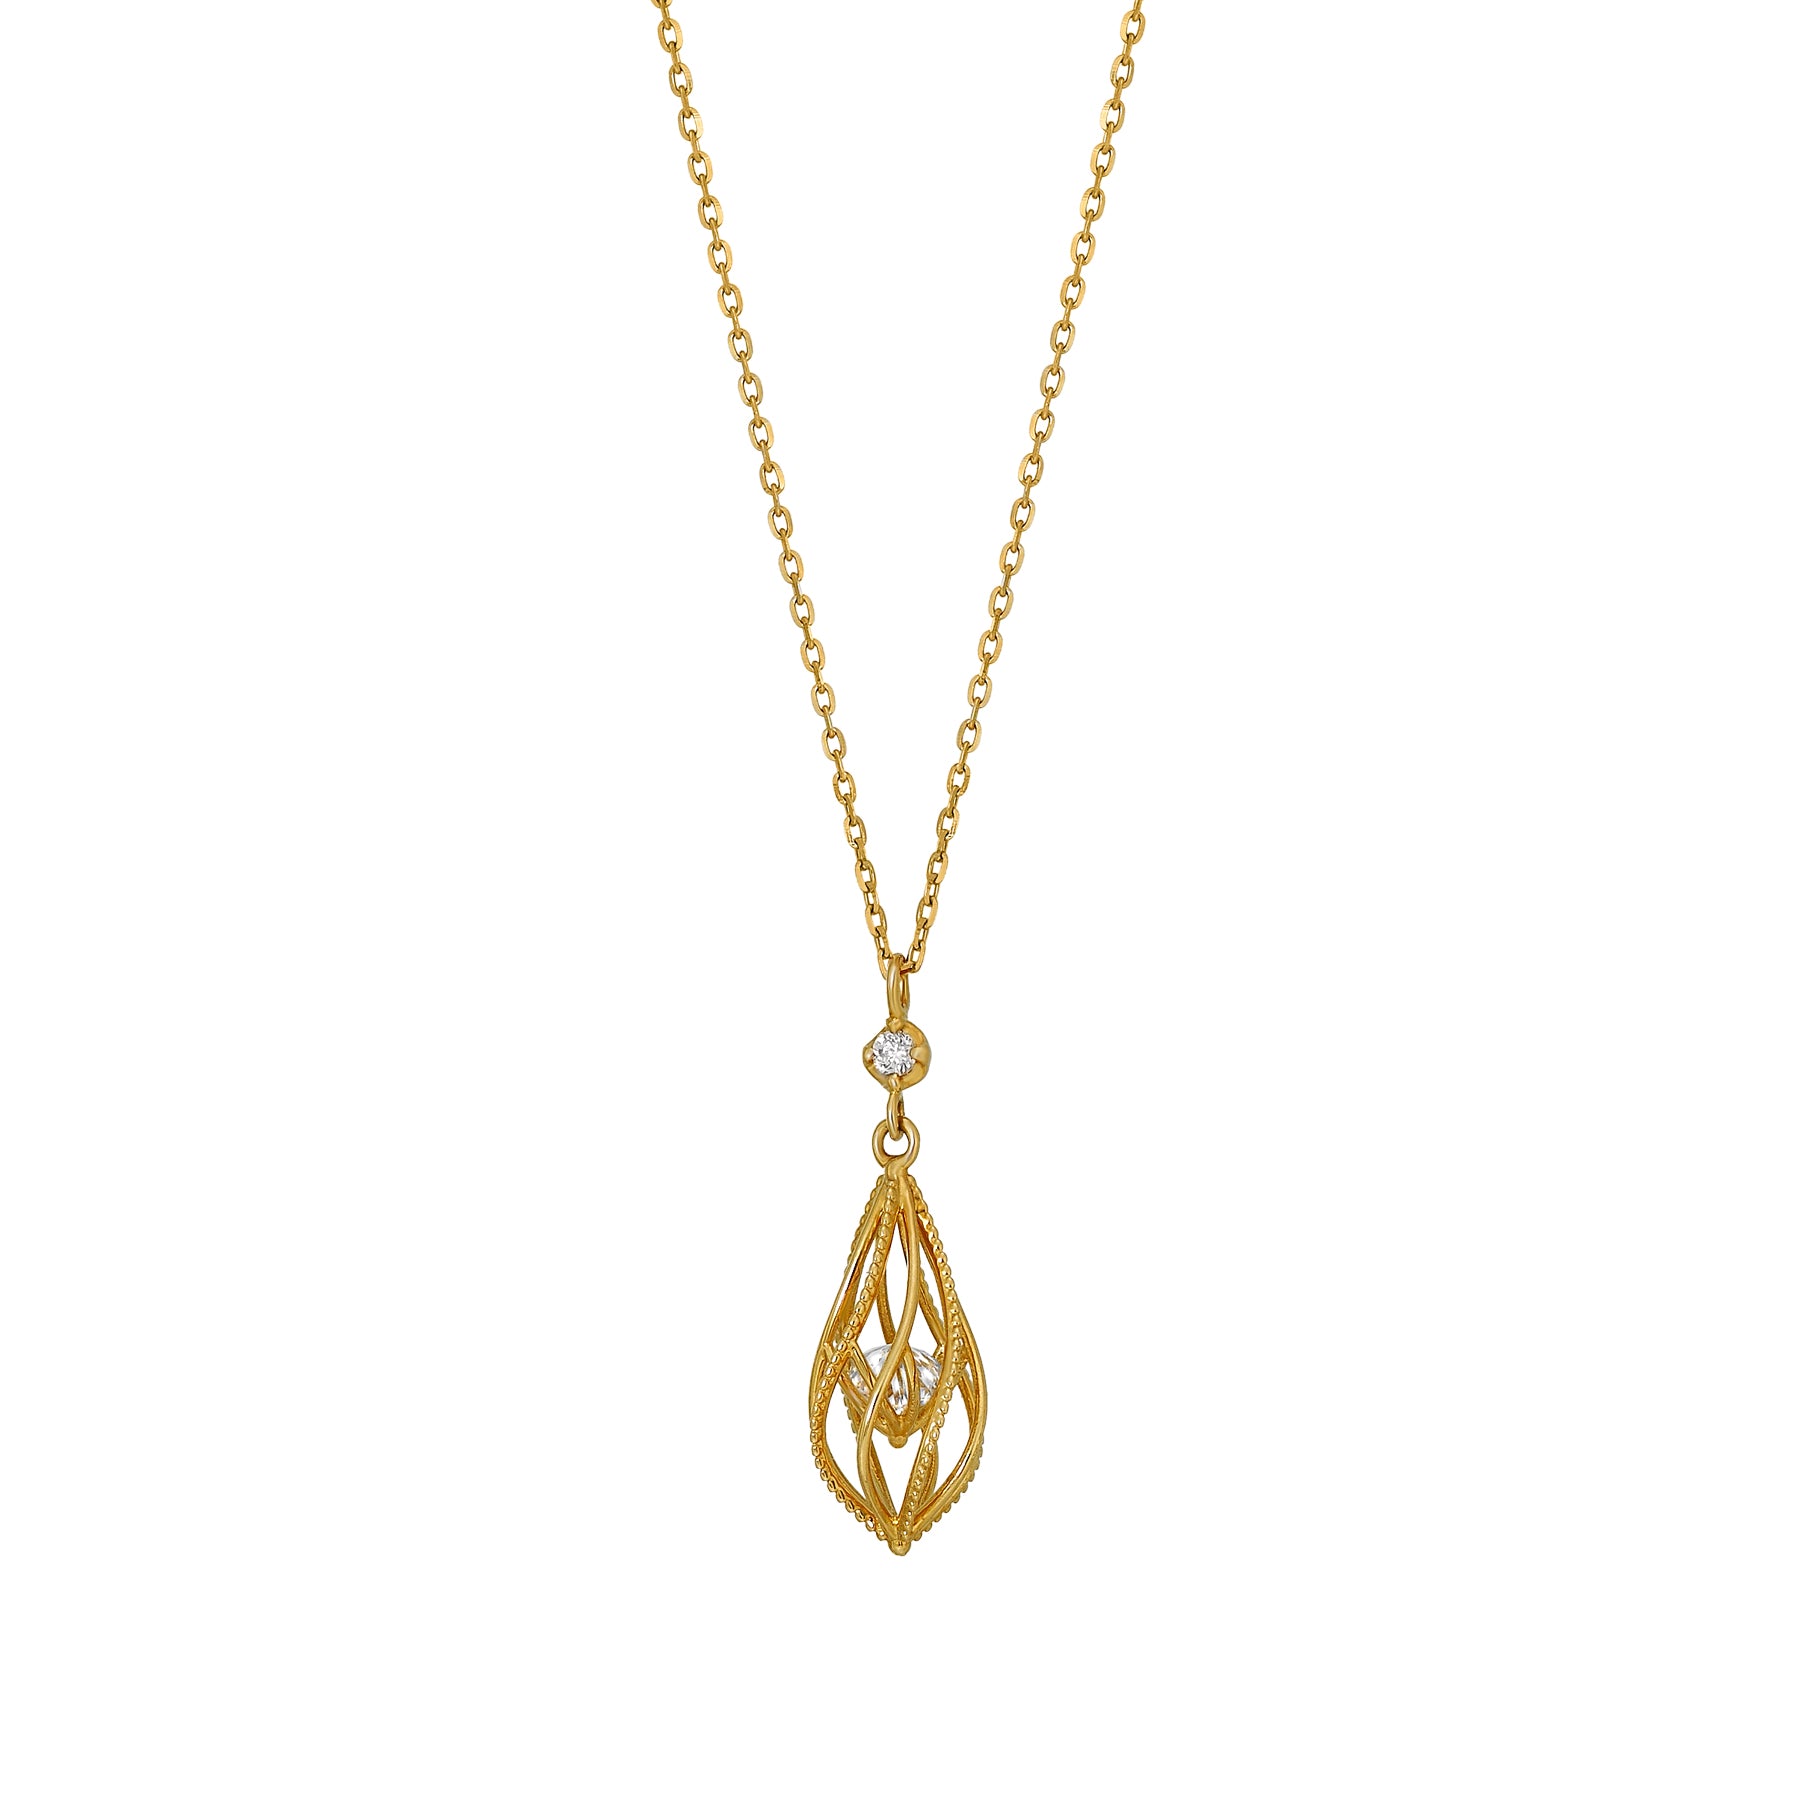 Gold Plated Sterling Silver 1 Carat Cubic Zirconia Necklace - Lovisa